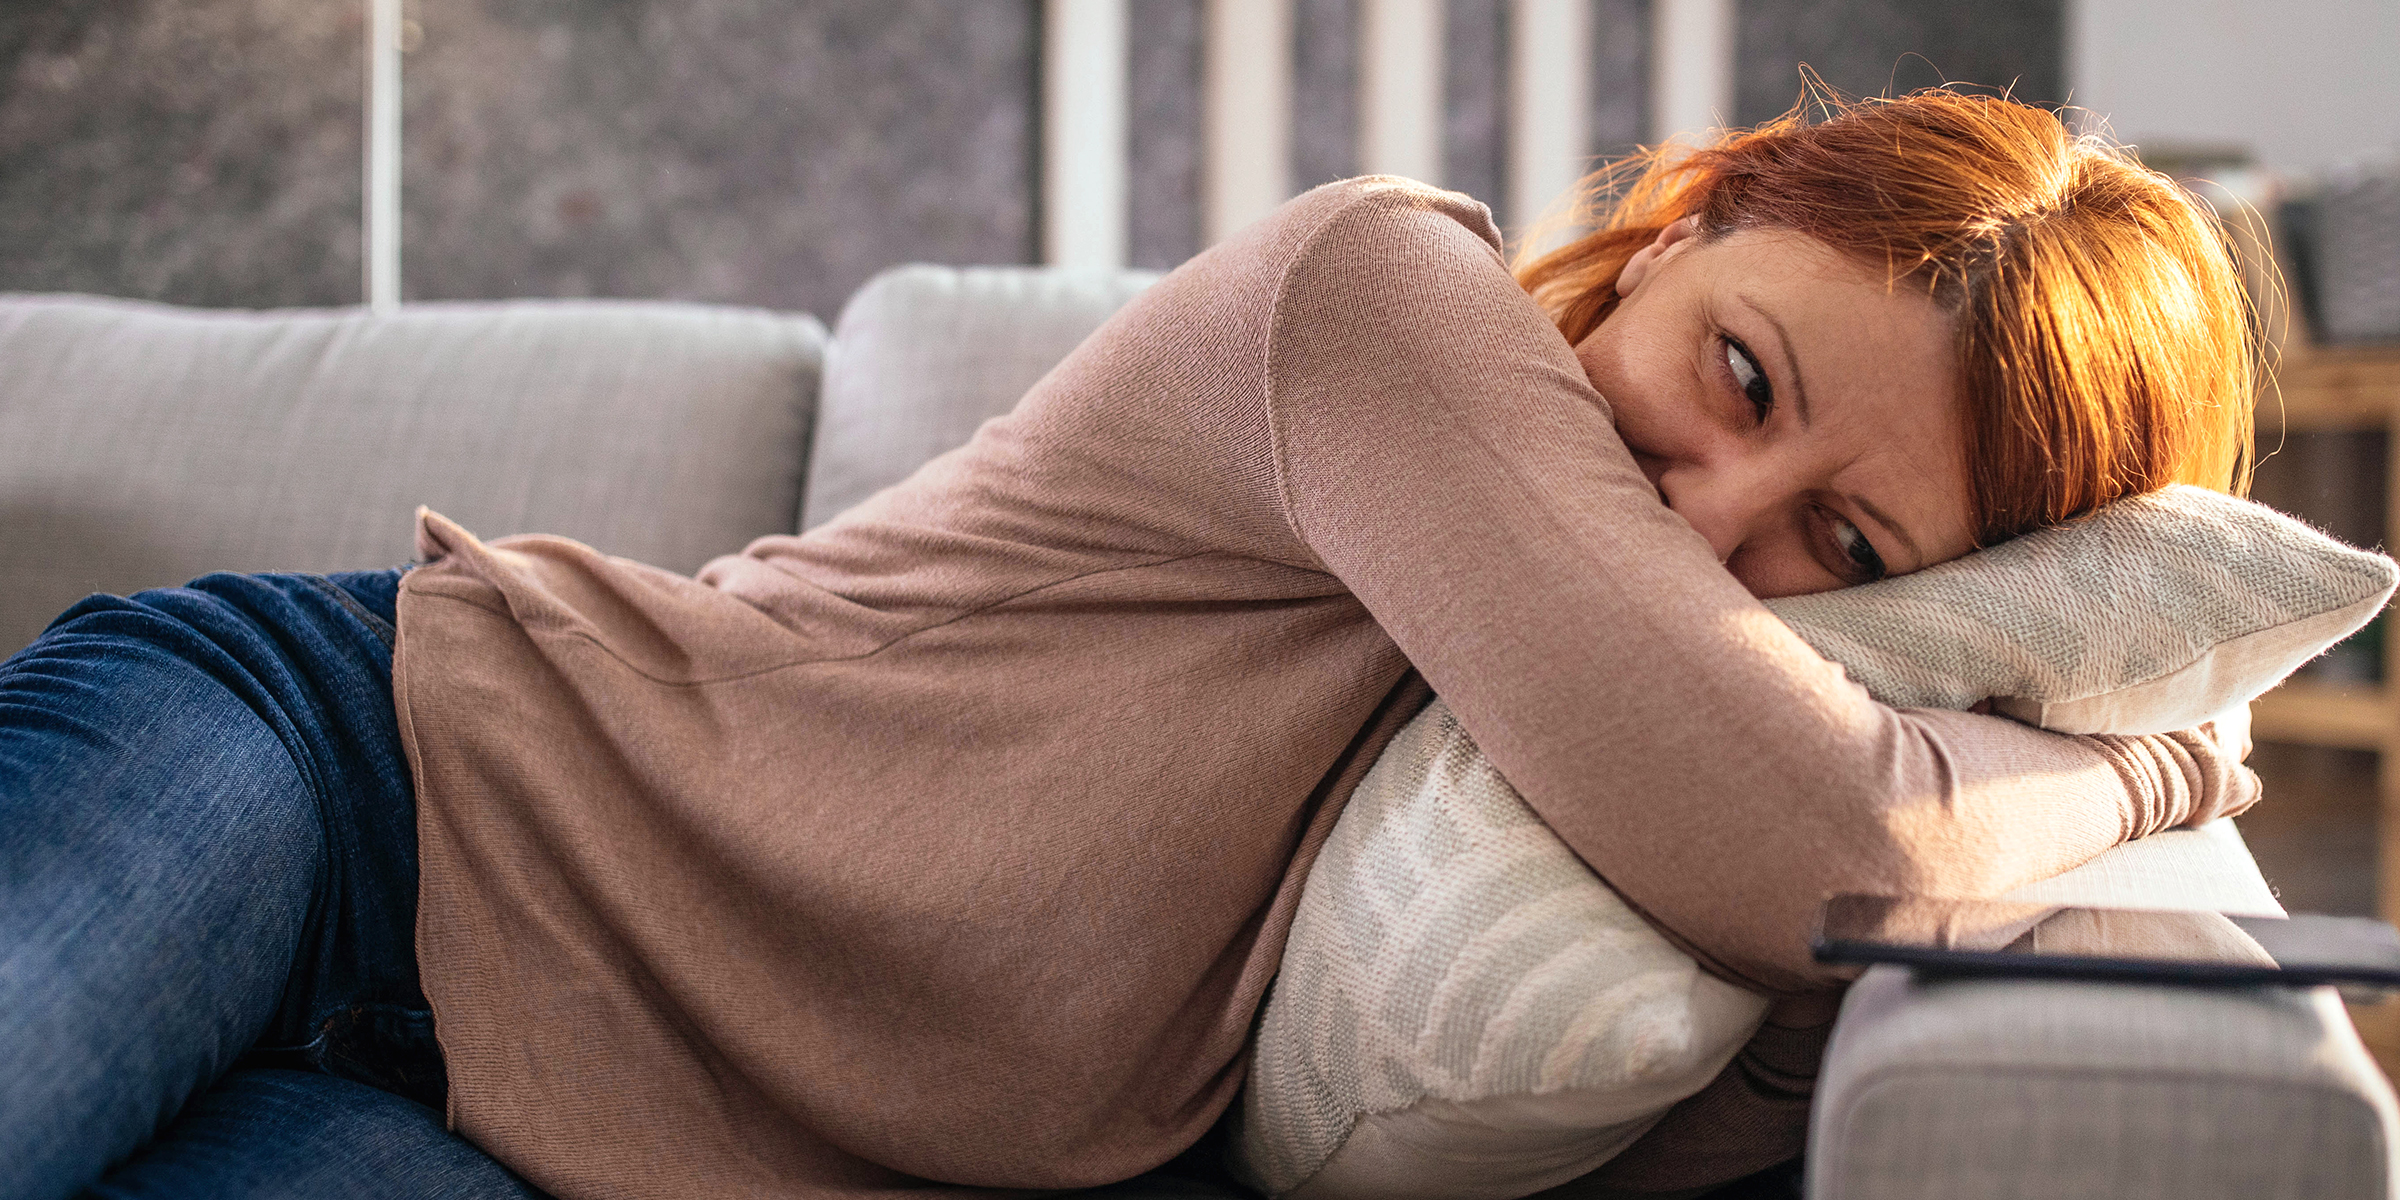 Stressed woman resting on the couch | Getty Images